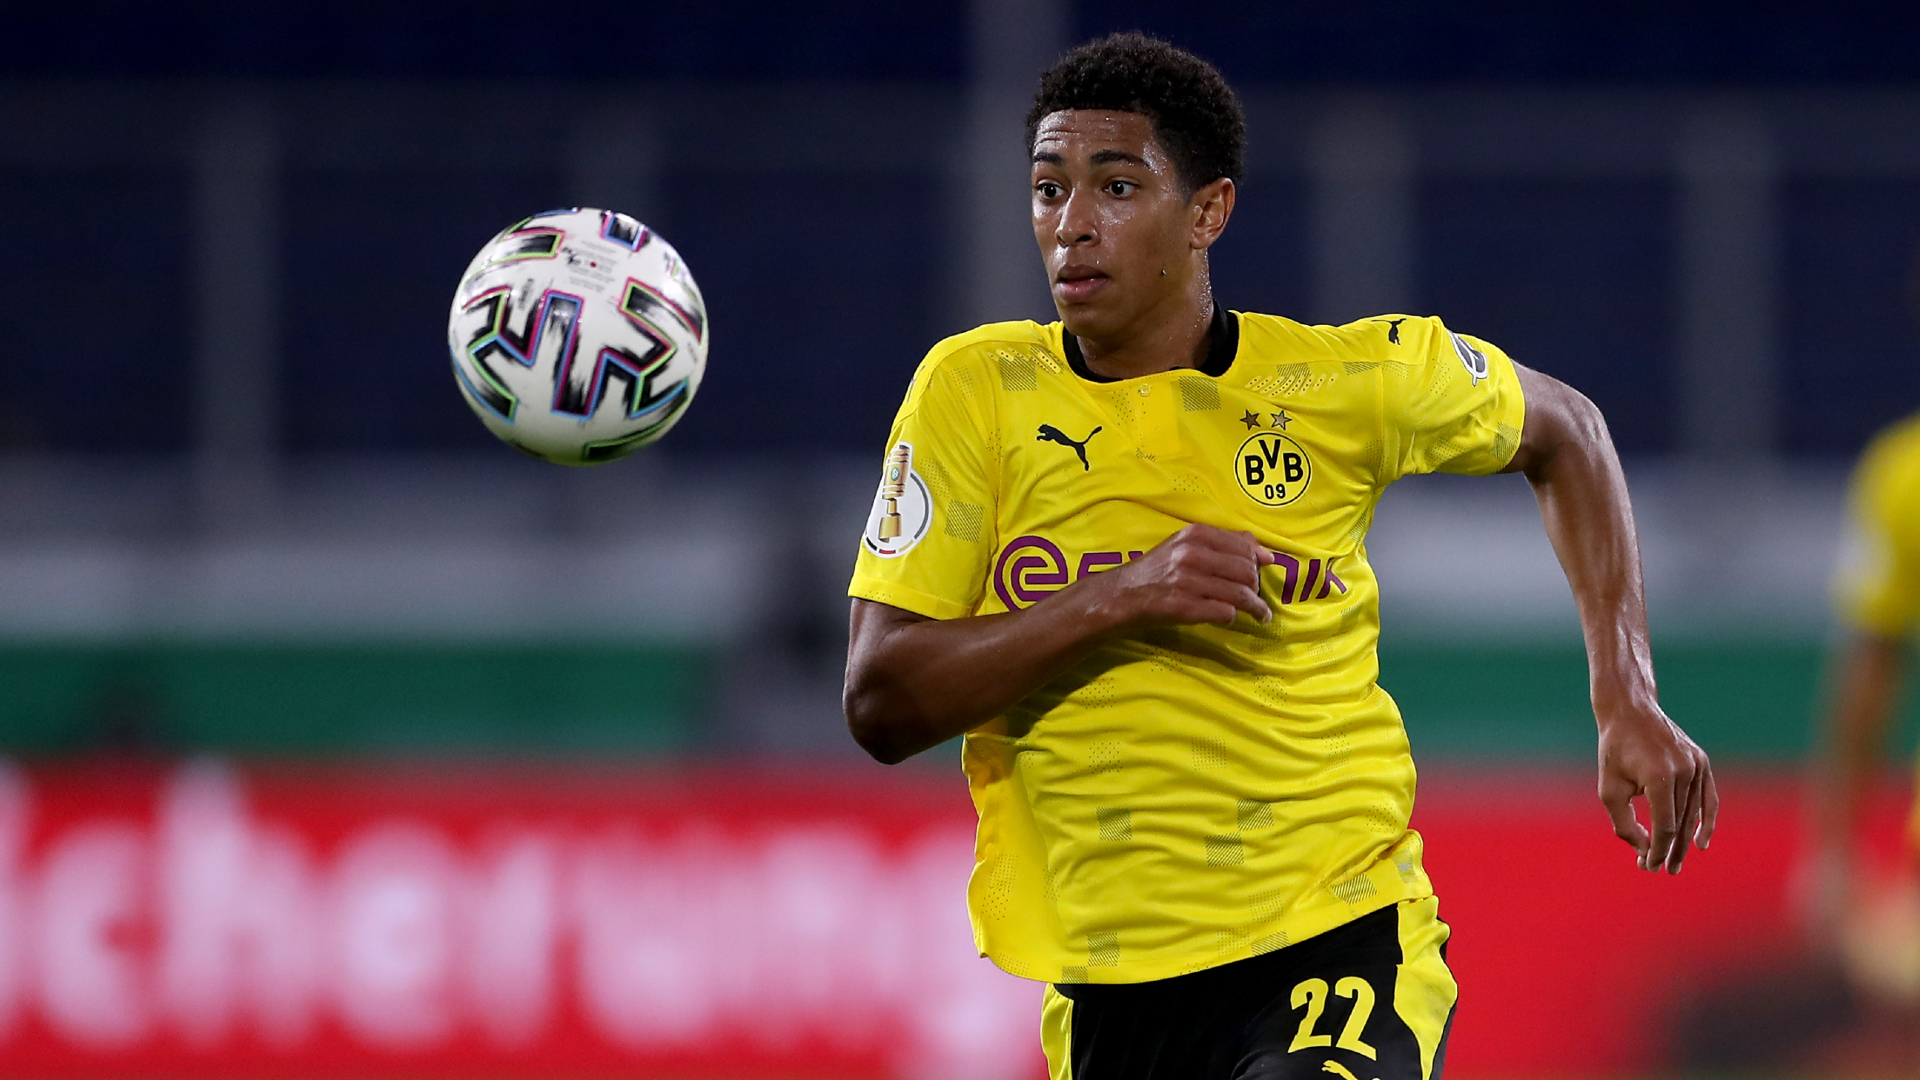 Bellingham becomes Borussia Dortmund's youngest scorer with debut goal